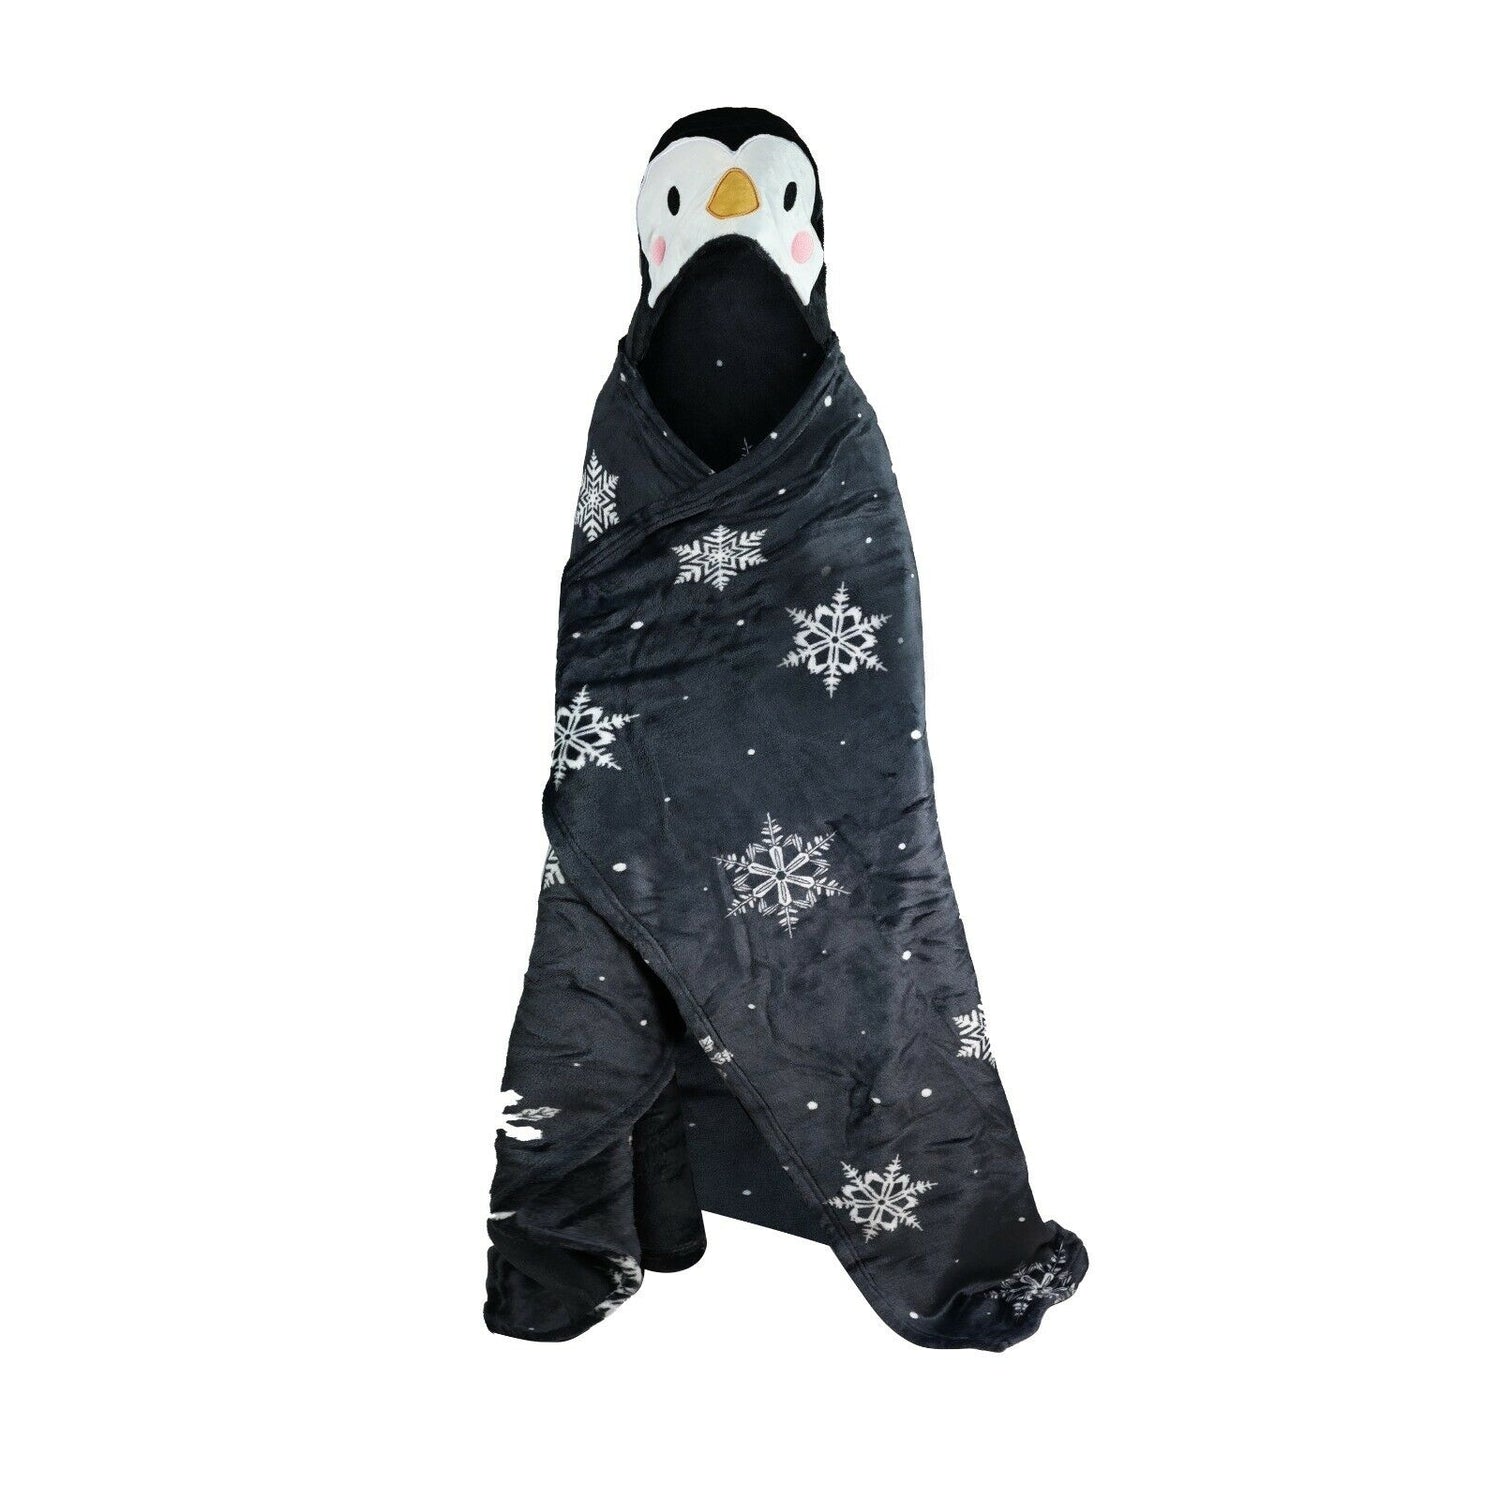 Children's Penguin Novelty Hooded Fleece Blanket, These Are Super Soft And Perfect For The Festive Season As A Gifts, They Measure 110cm x140cm, 100% Polyester (Excludes Trimming)